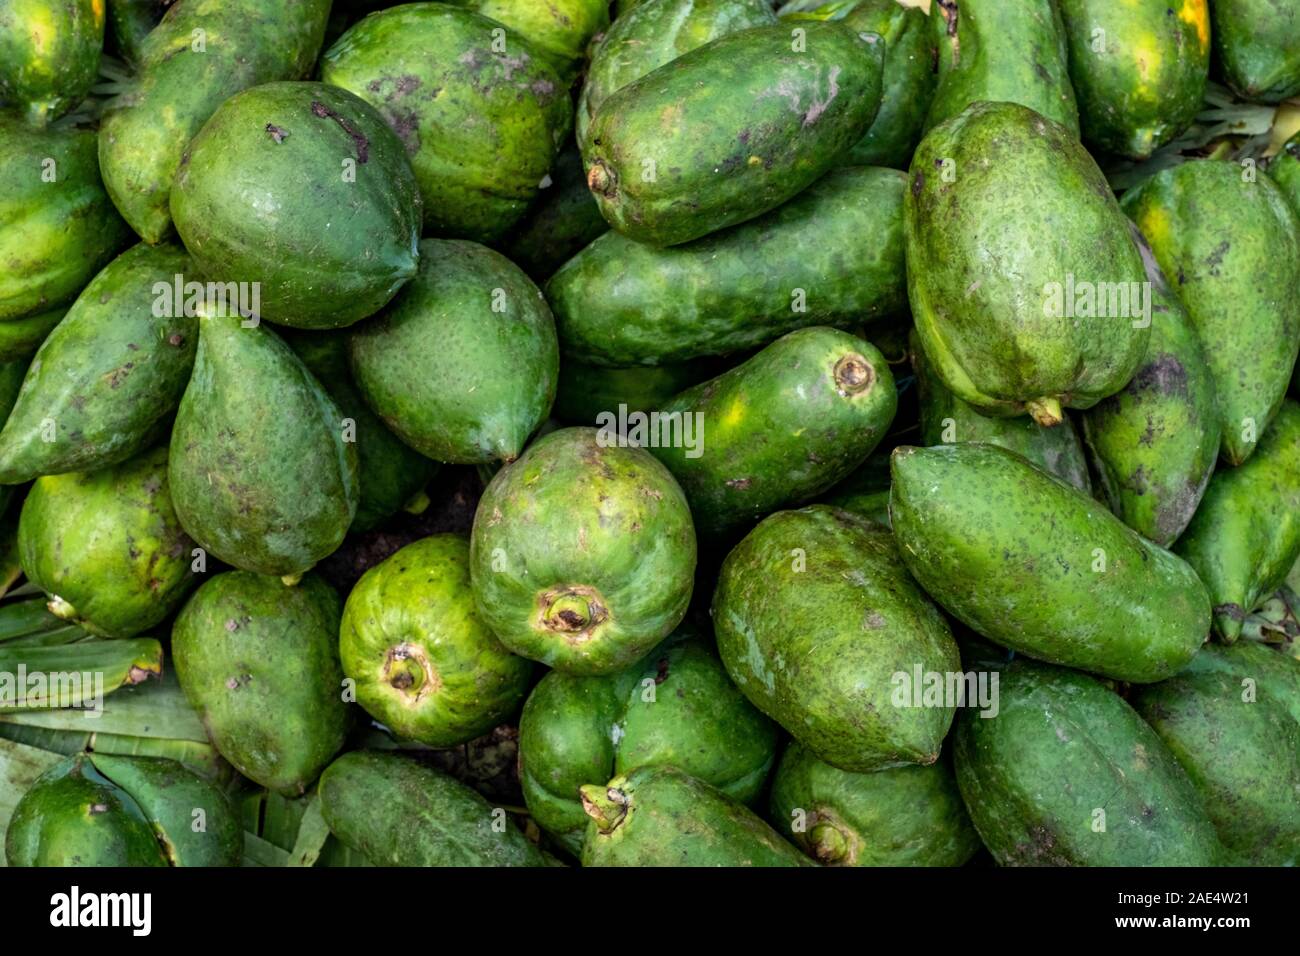 Display of many papayas or pawpaws in a bright green skin found for sale in a railroad market in Mandalay, Myanmar (Burma) Stock Photo